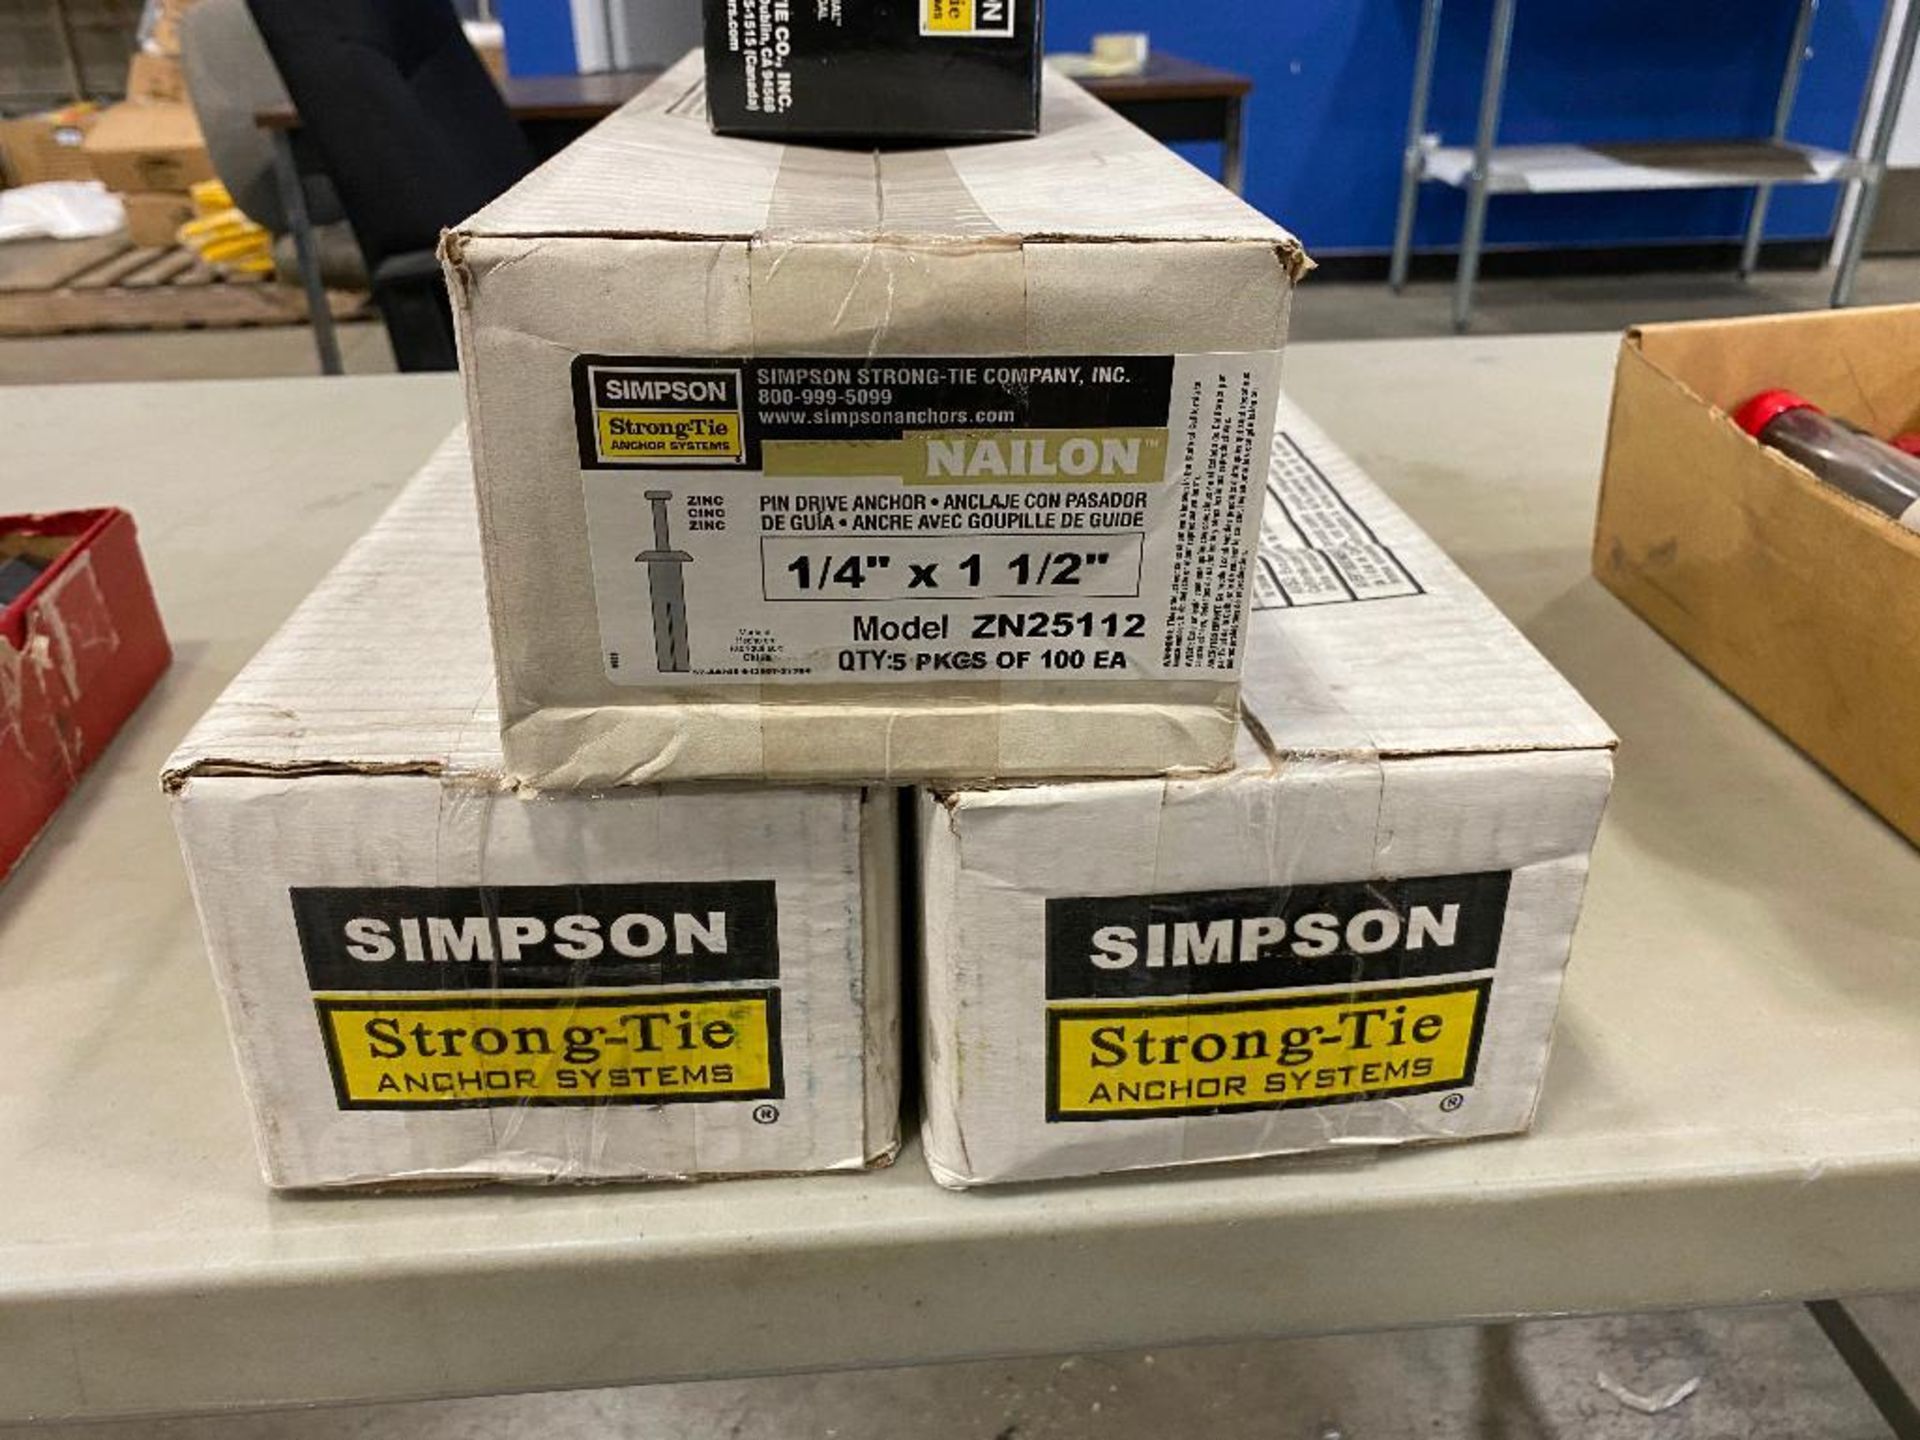 Lot of Asst. Simpson Strong Tie Anchor Systems including 1/4"X1-1/2", 1/4"X1", etc. - Image 3 of 4